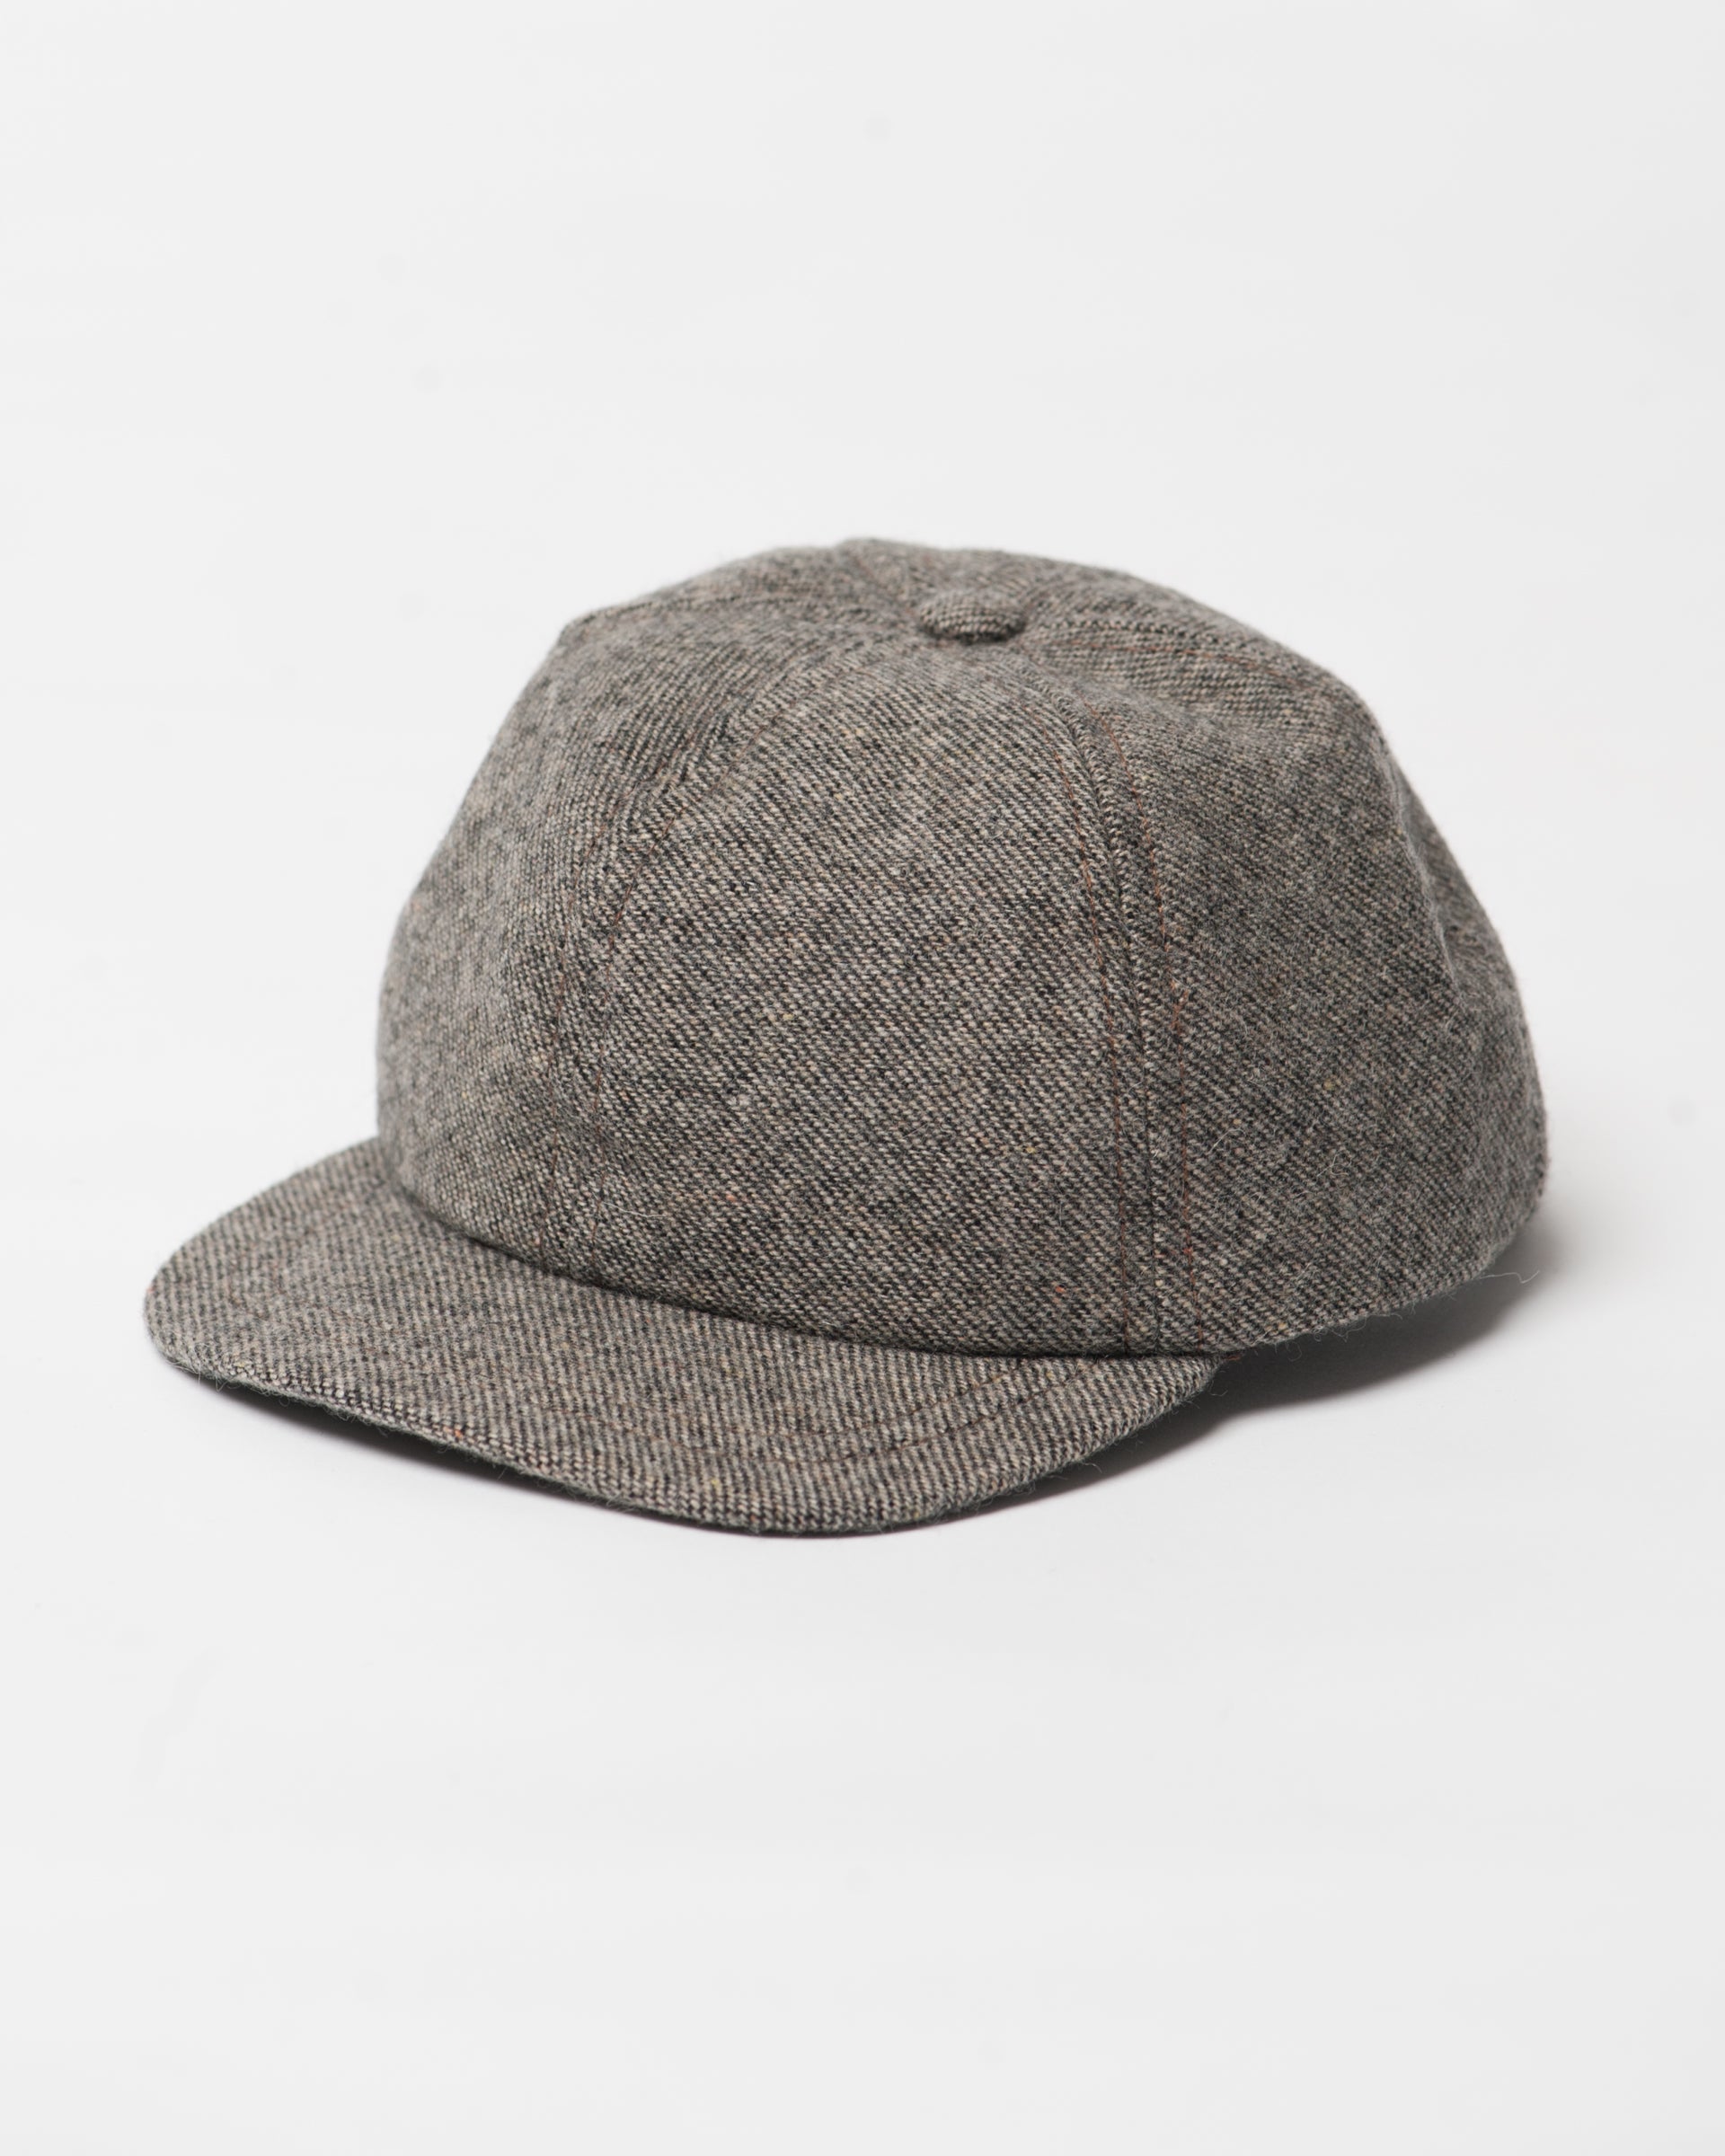 Toddler Brown Twill Wool Cap - front